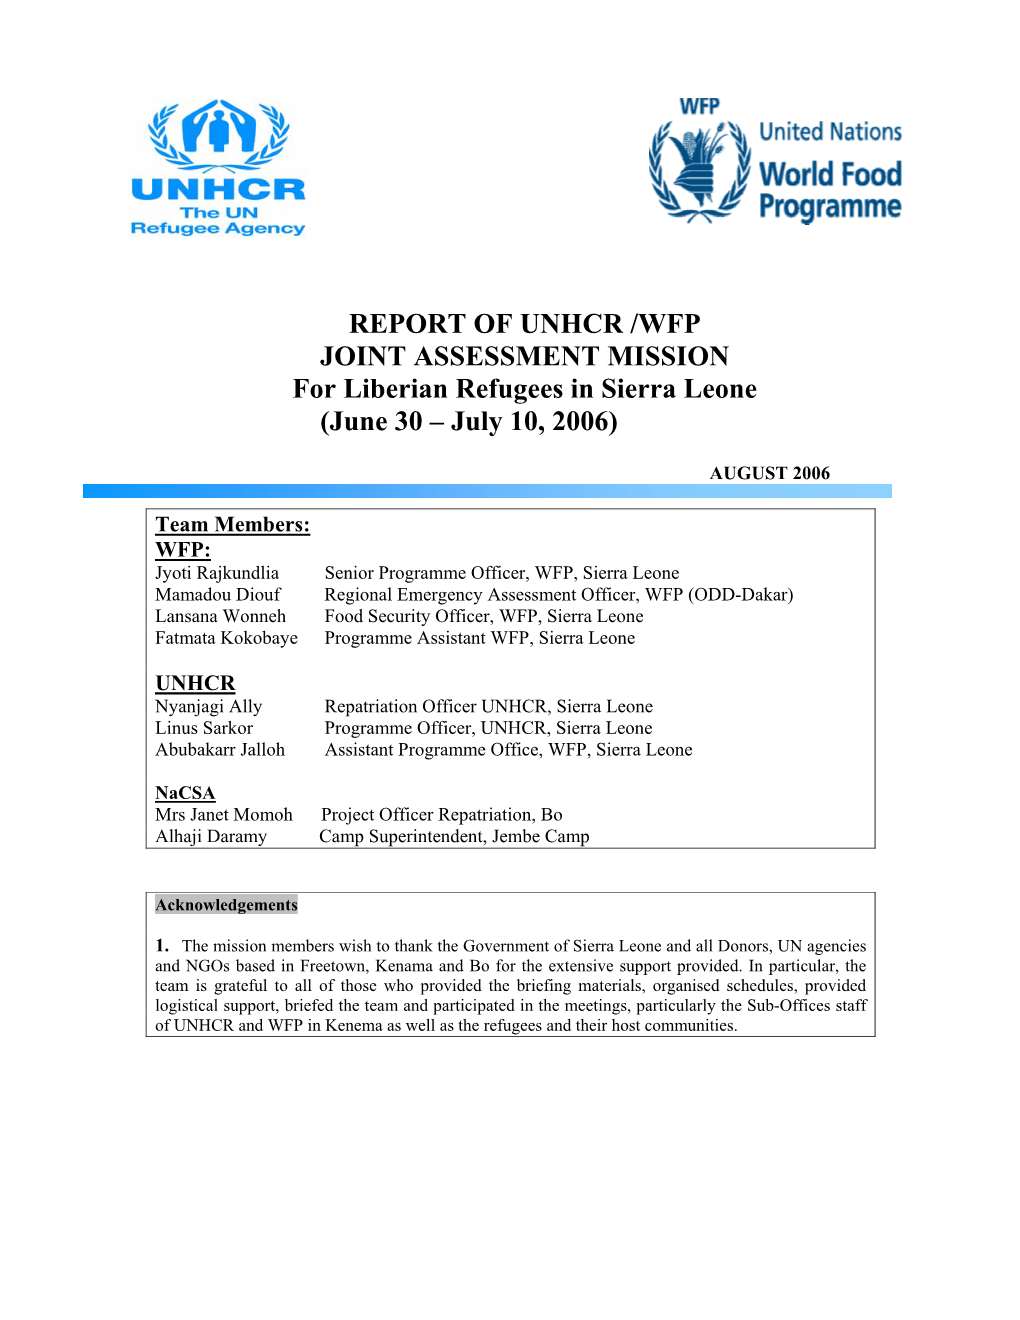 REPORT of UNHCR /WFP JOINT ASSESSMENT MISSION for Liberian Refugees in Sierra Leone (June 30 – July 10, 2006)